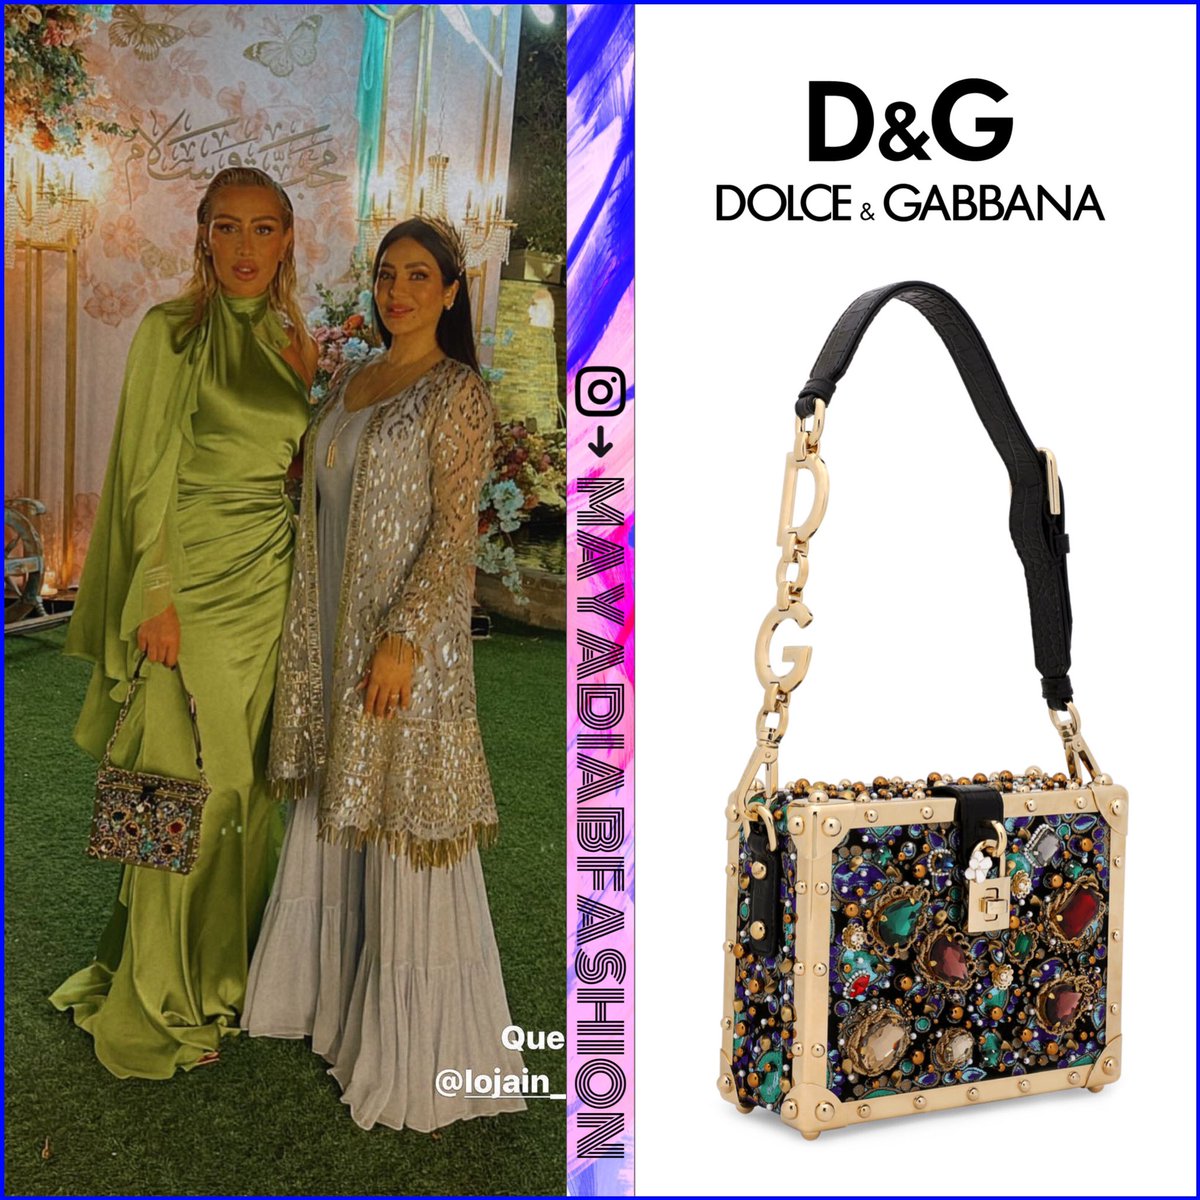 #MayaDiab looked brilliant by wearing Glowing Green Mock Neck Ruffled Detail #Gown by #ChristianSiriano
And Carried Jacquard Dolce Box #Bag with Embroidery by #DolceGabbana
#MayaDiabFashion #Diabers @mayadiab @csiriano @dolcegabbana 
#مايا_دياب